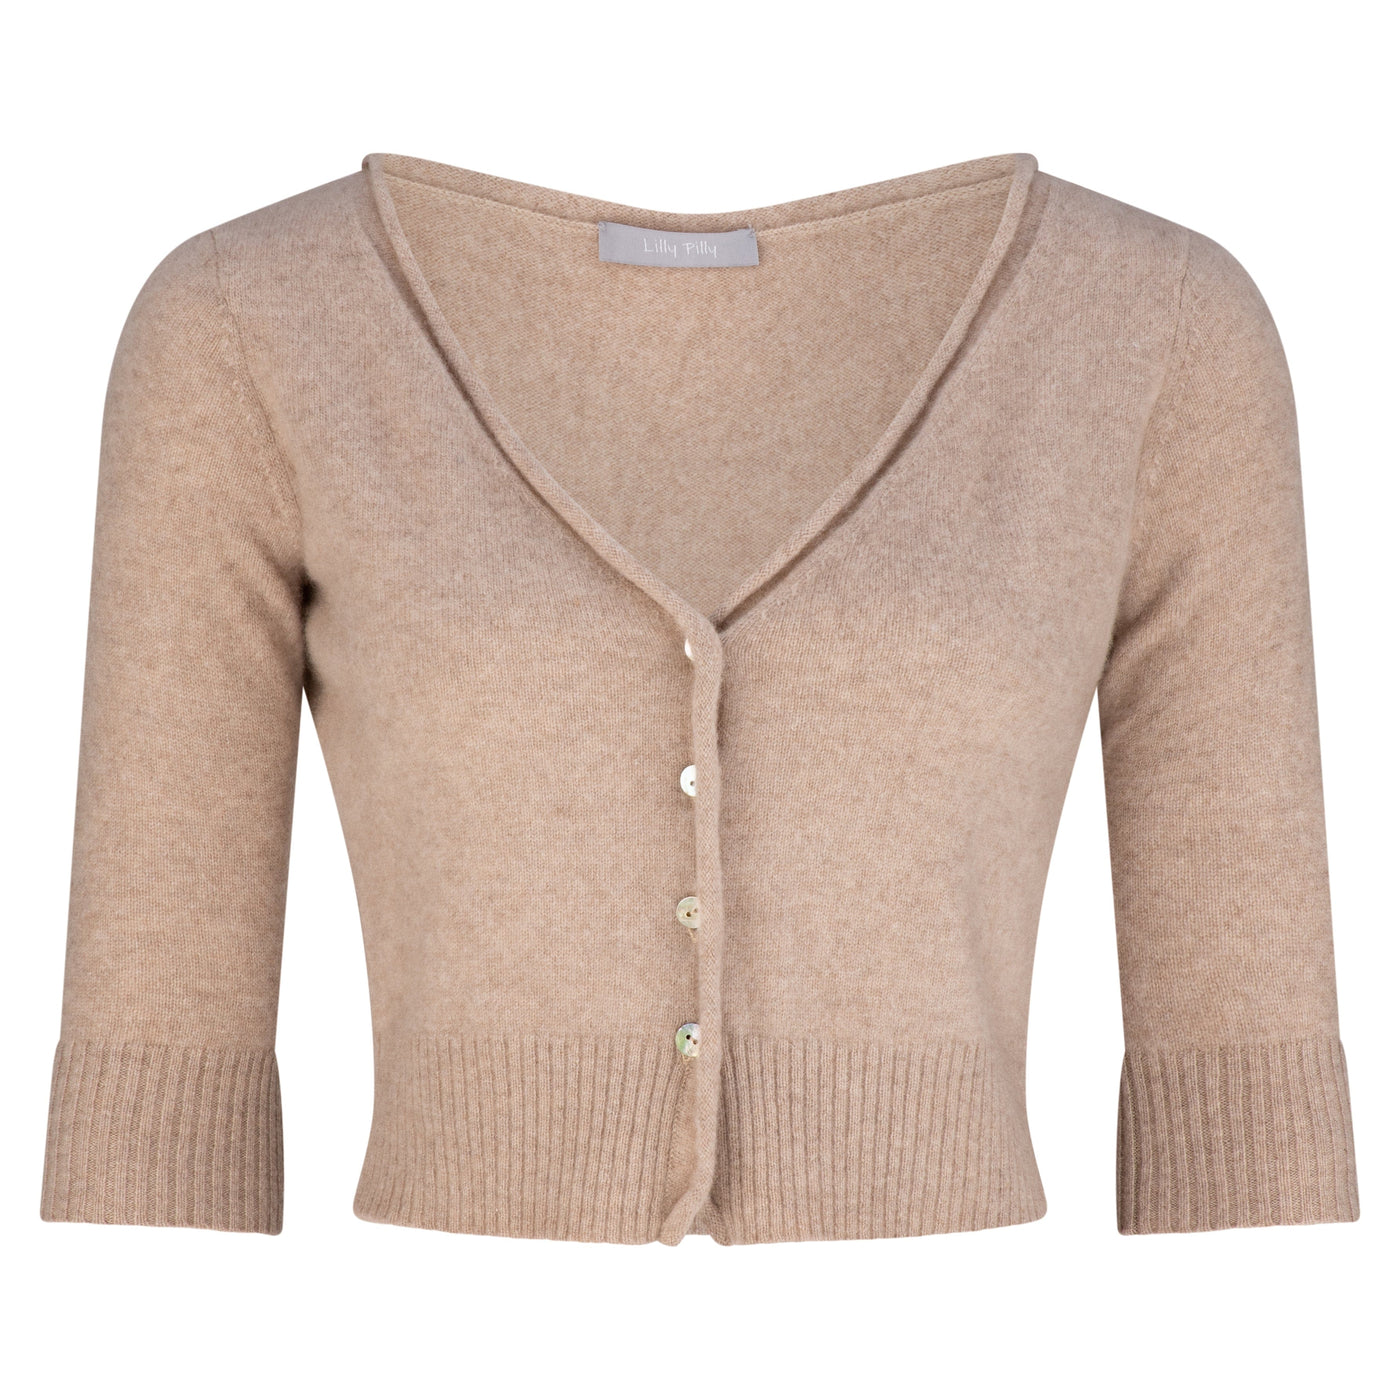 Lilly Pilly Collection recycled Cashmere cardigan top in Oatmeal. 3D model showing front view.